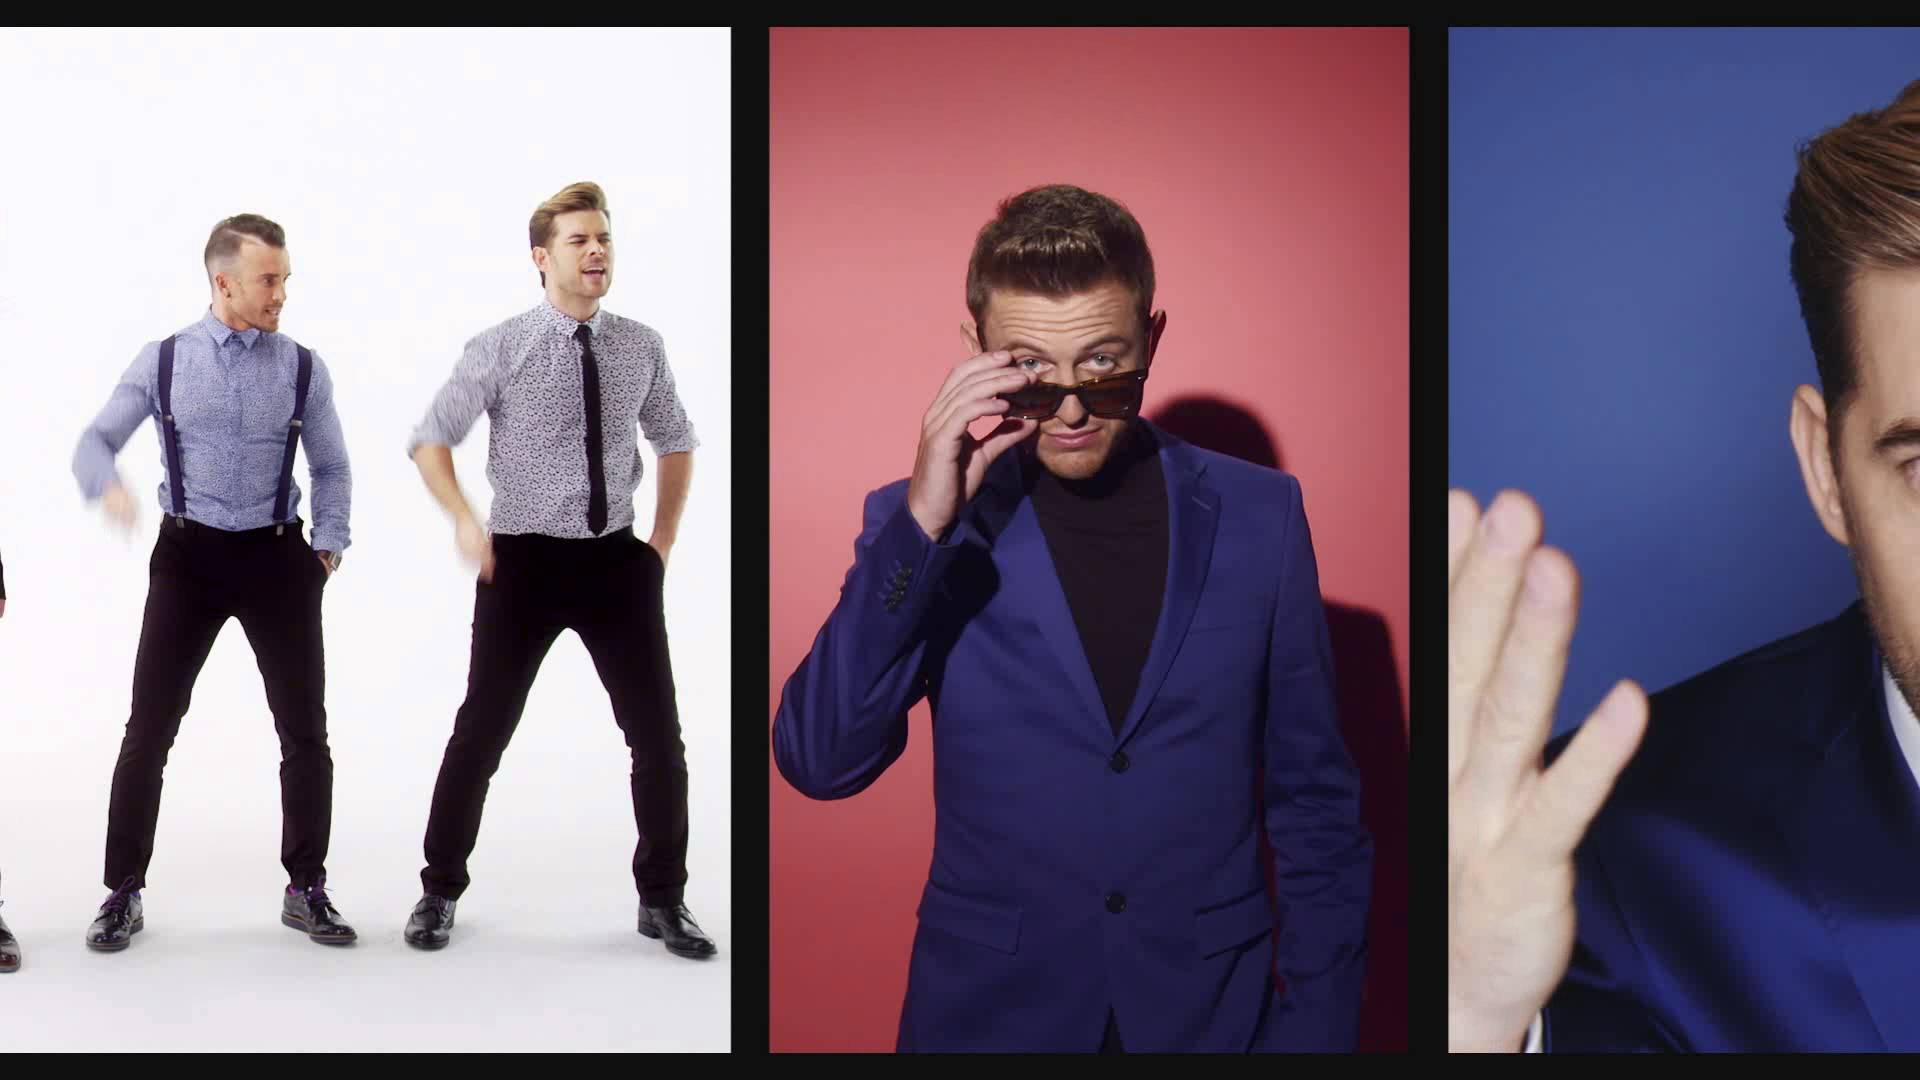 The Overtones High Quality Background on Wallpapers Vista